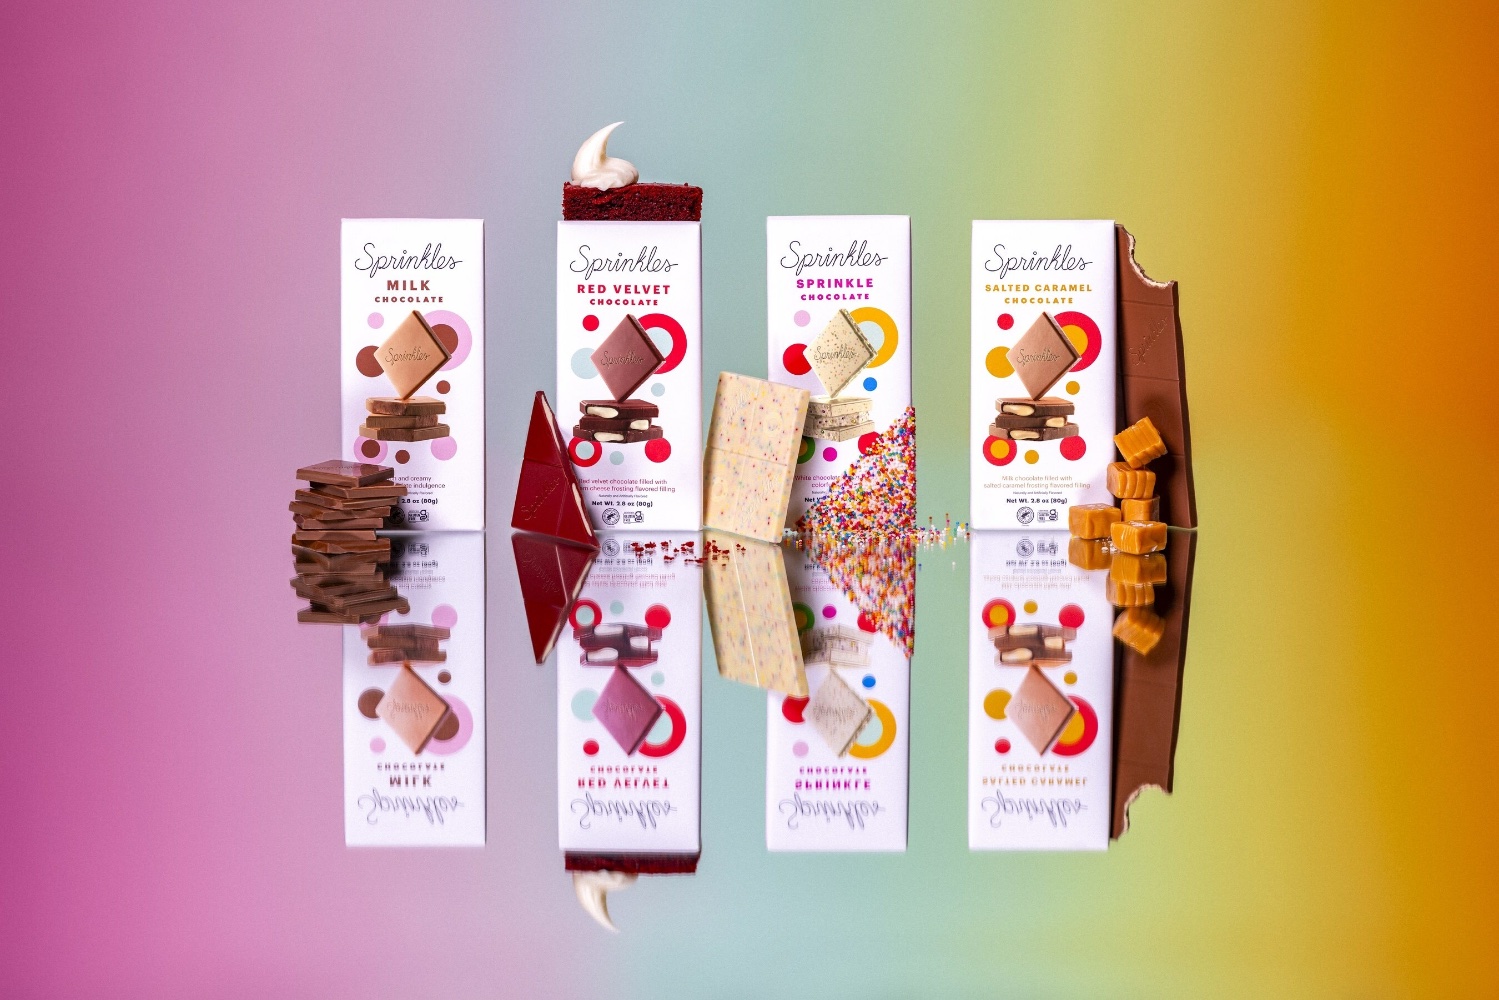 Sprinkles Taps Into McBling Nostalgia with Their Playfully Mature Chocolate Design